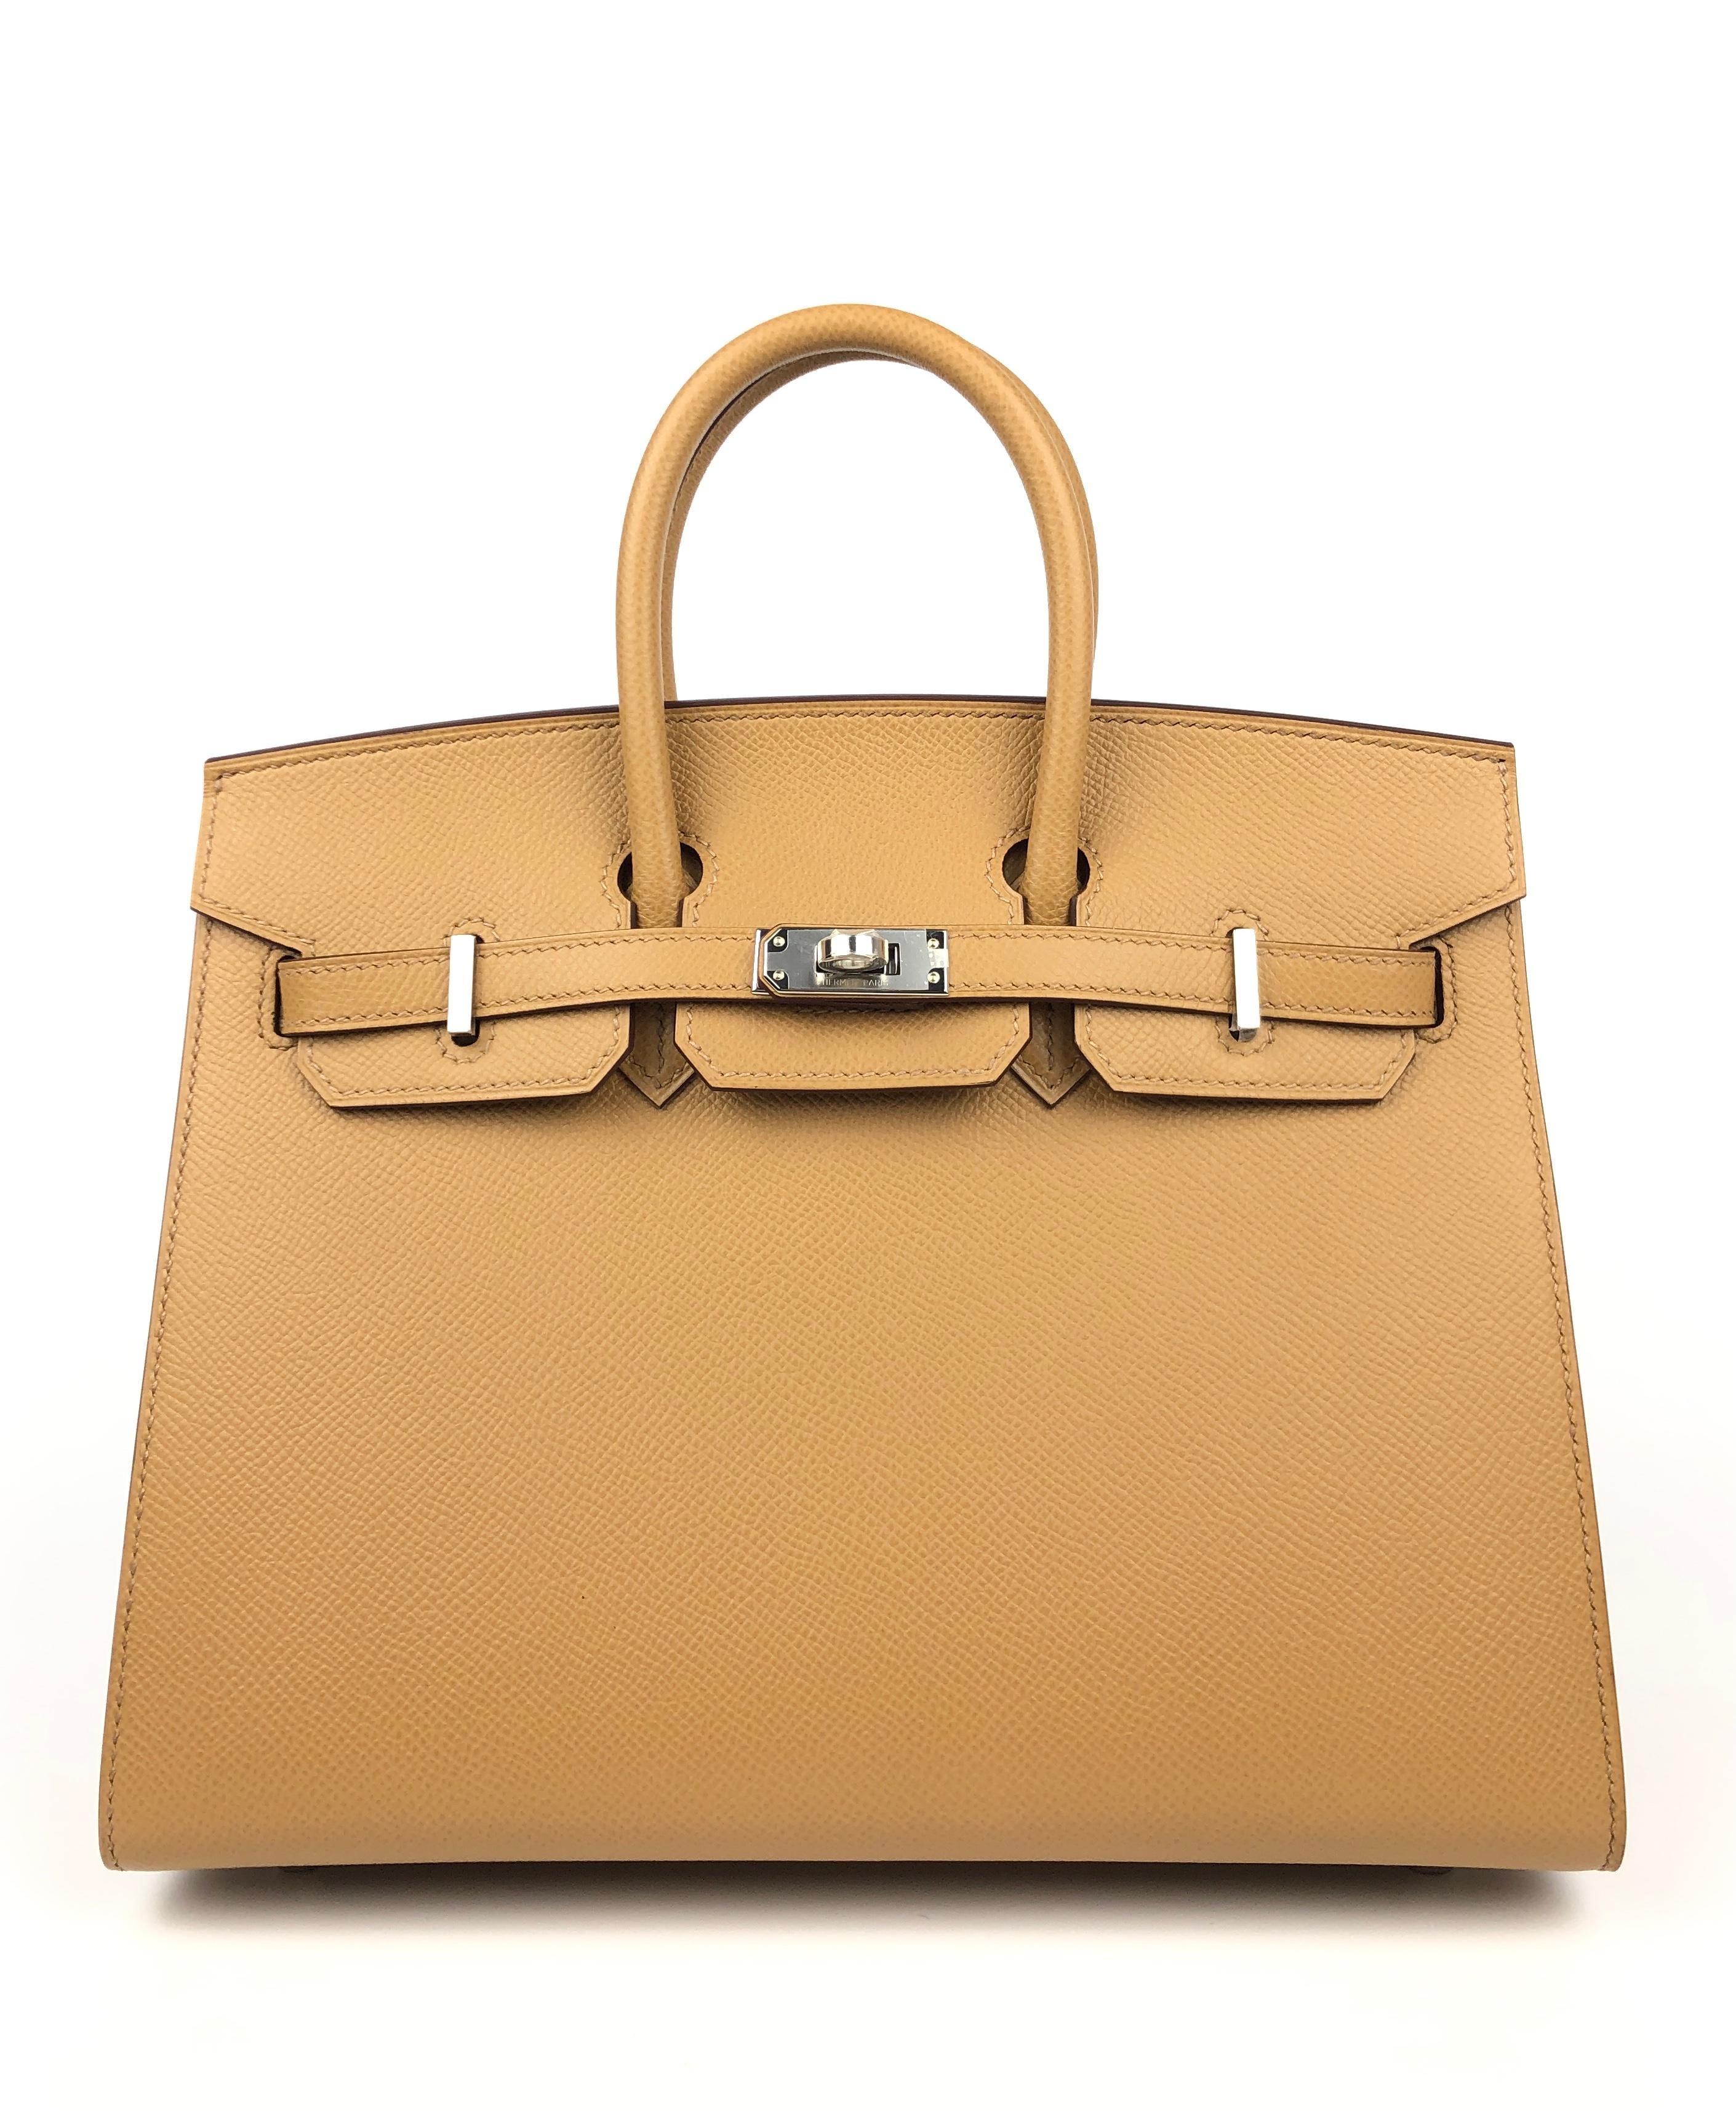 Ultra Rare Brand New Hermes Birkin 25 Sellier Madame Leather Biscuit Palladium Hardware. Z Stamp 2021.

Shop with Confidence from Lux Addicts. Authenticity Guaranteed!